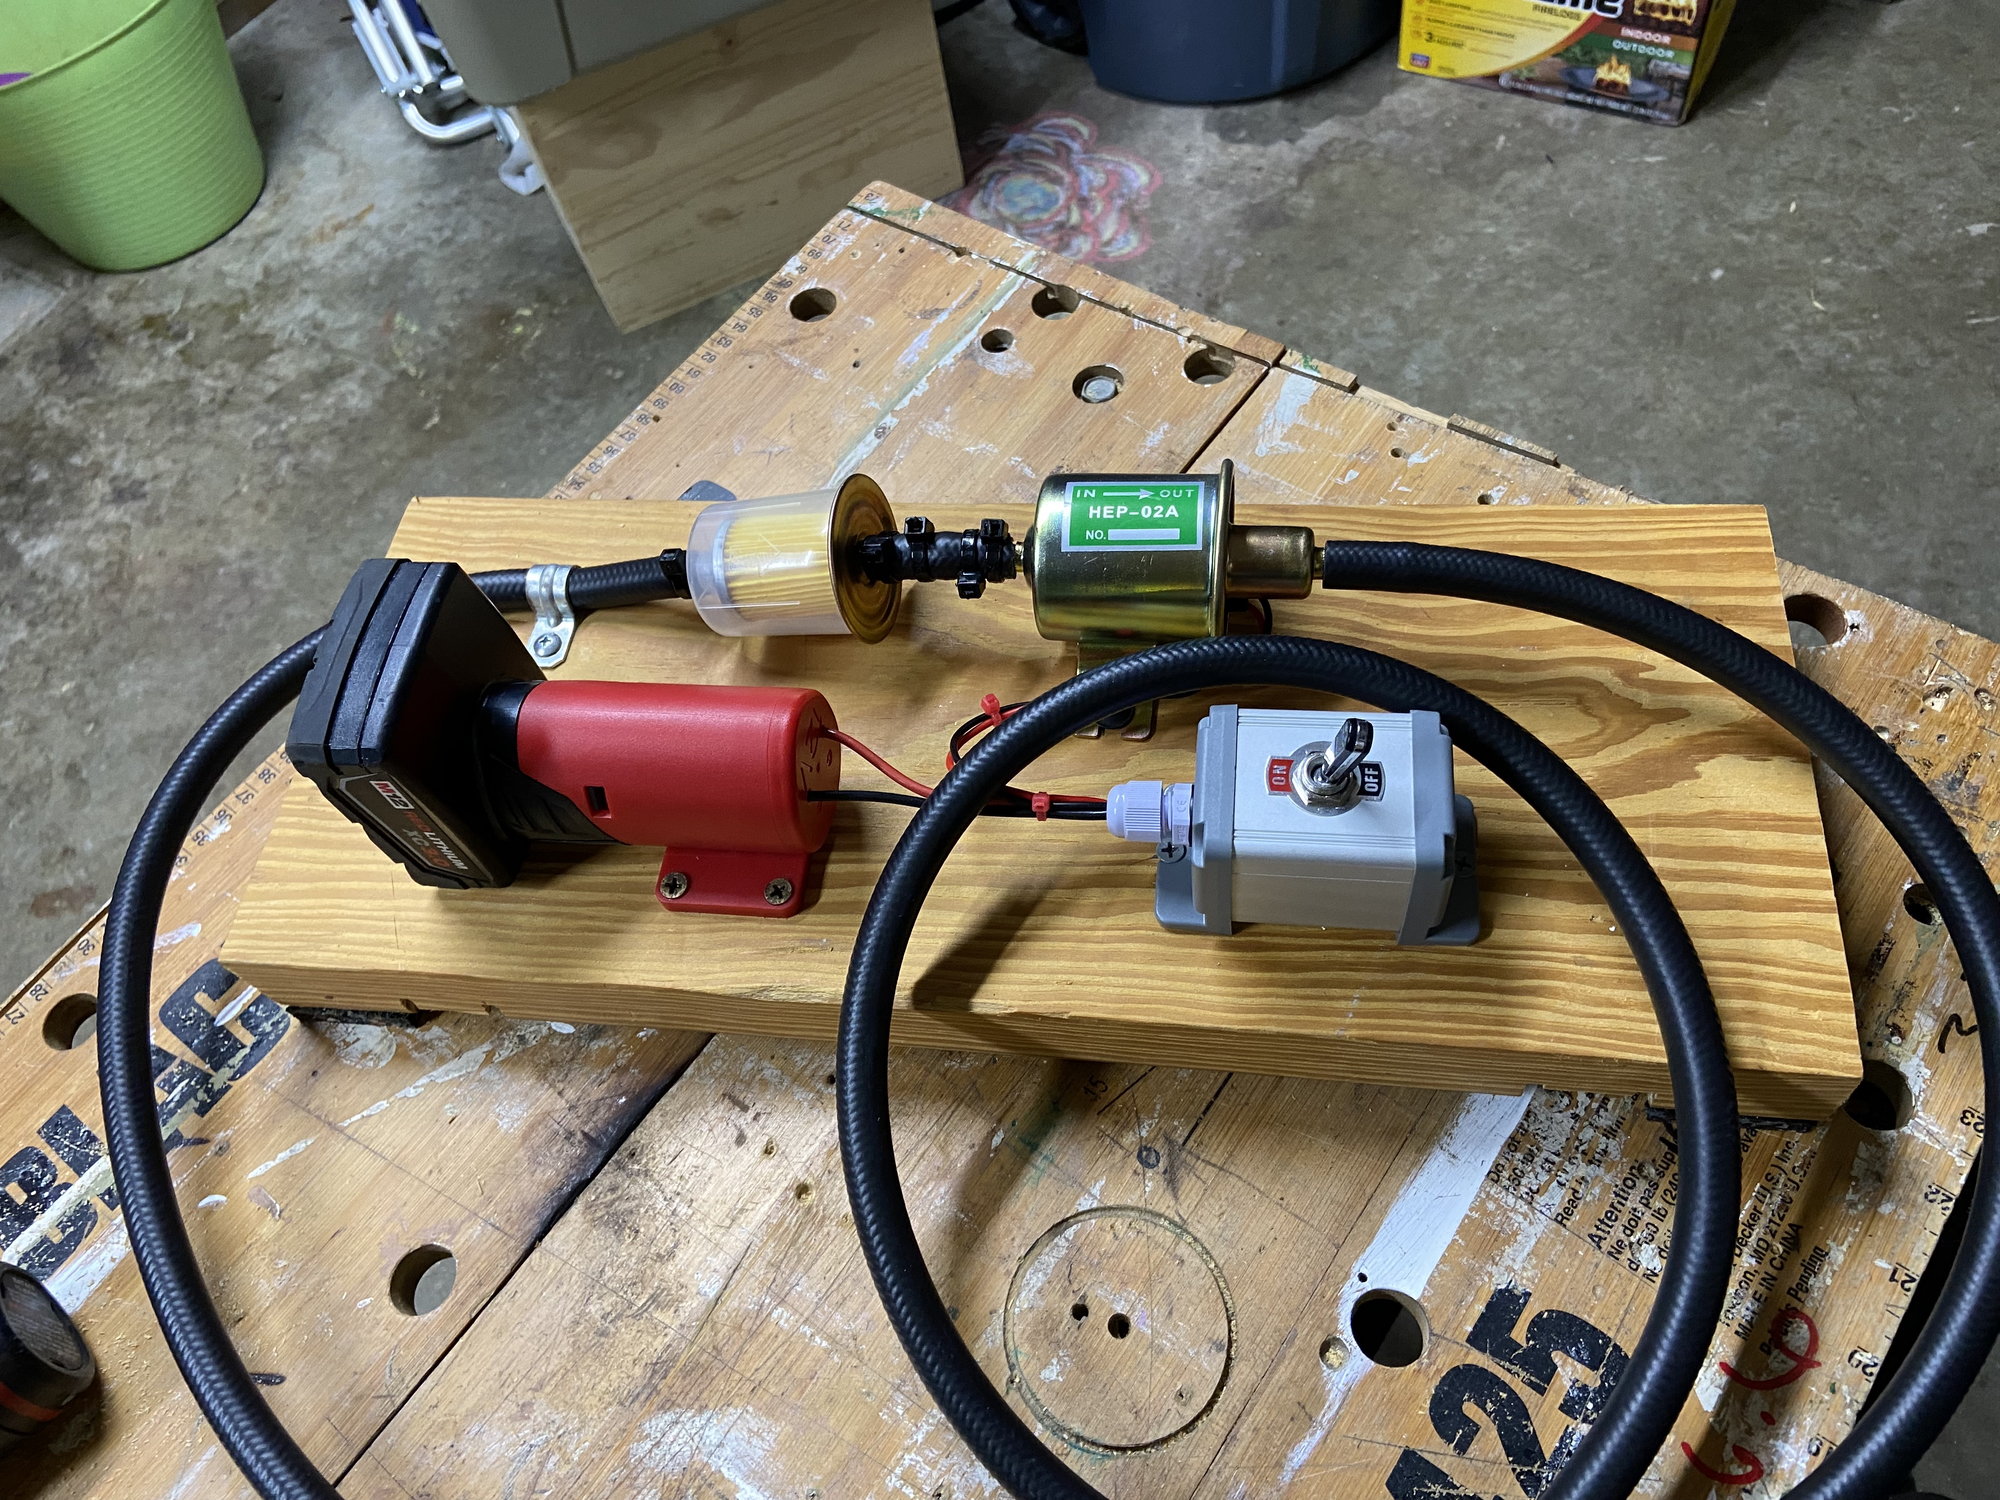 Fuel pump removal made easy